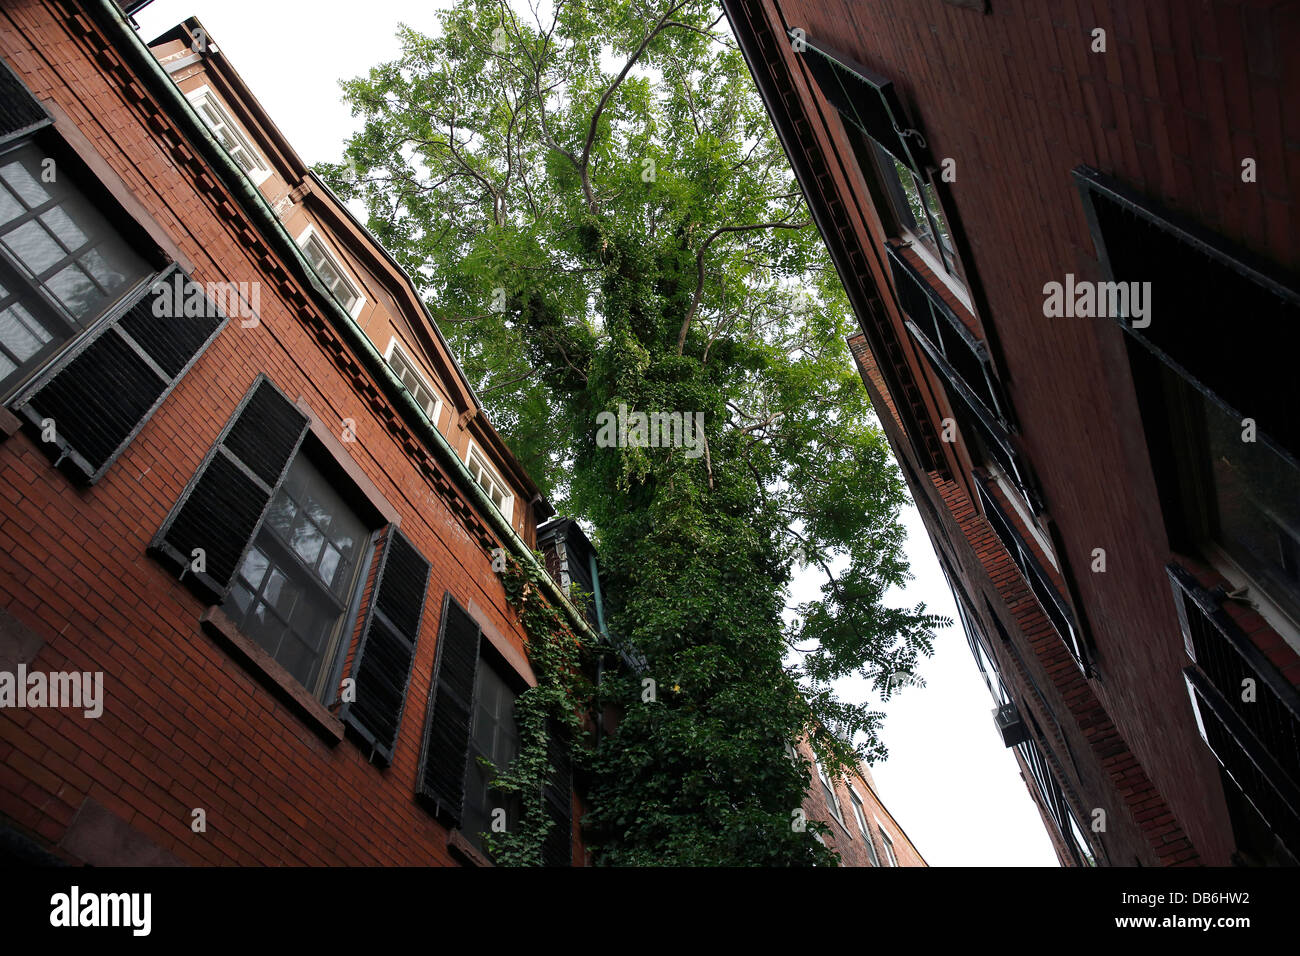 A tree grows between houses in Sentry Hill Place, a narrow pedestrian street on Beacon Hill in Boston, Massachusetts Stock Photo